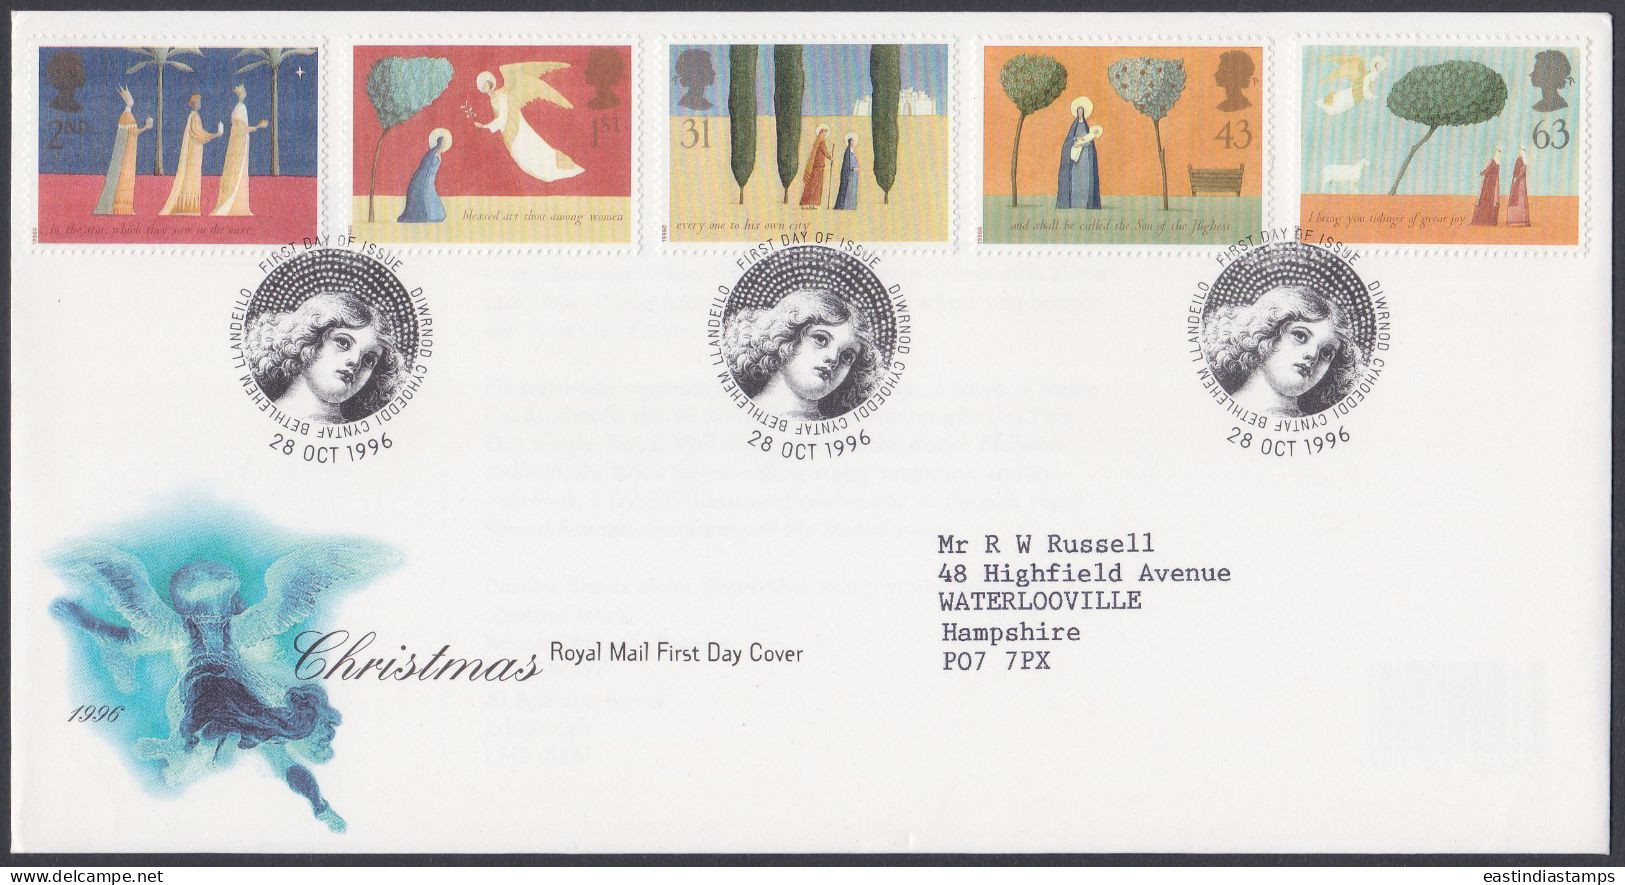 GB Great Britain 1996 FDC Christmas, Christianity, Festival, Christian, Pictorial Postmark, First Day Cover - Brieven En Documenten